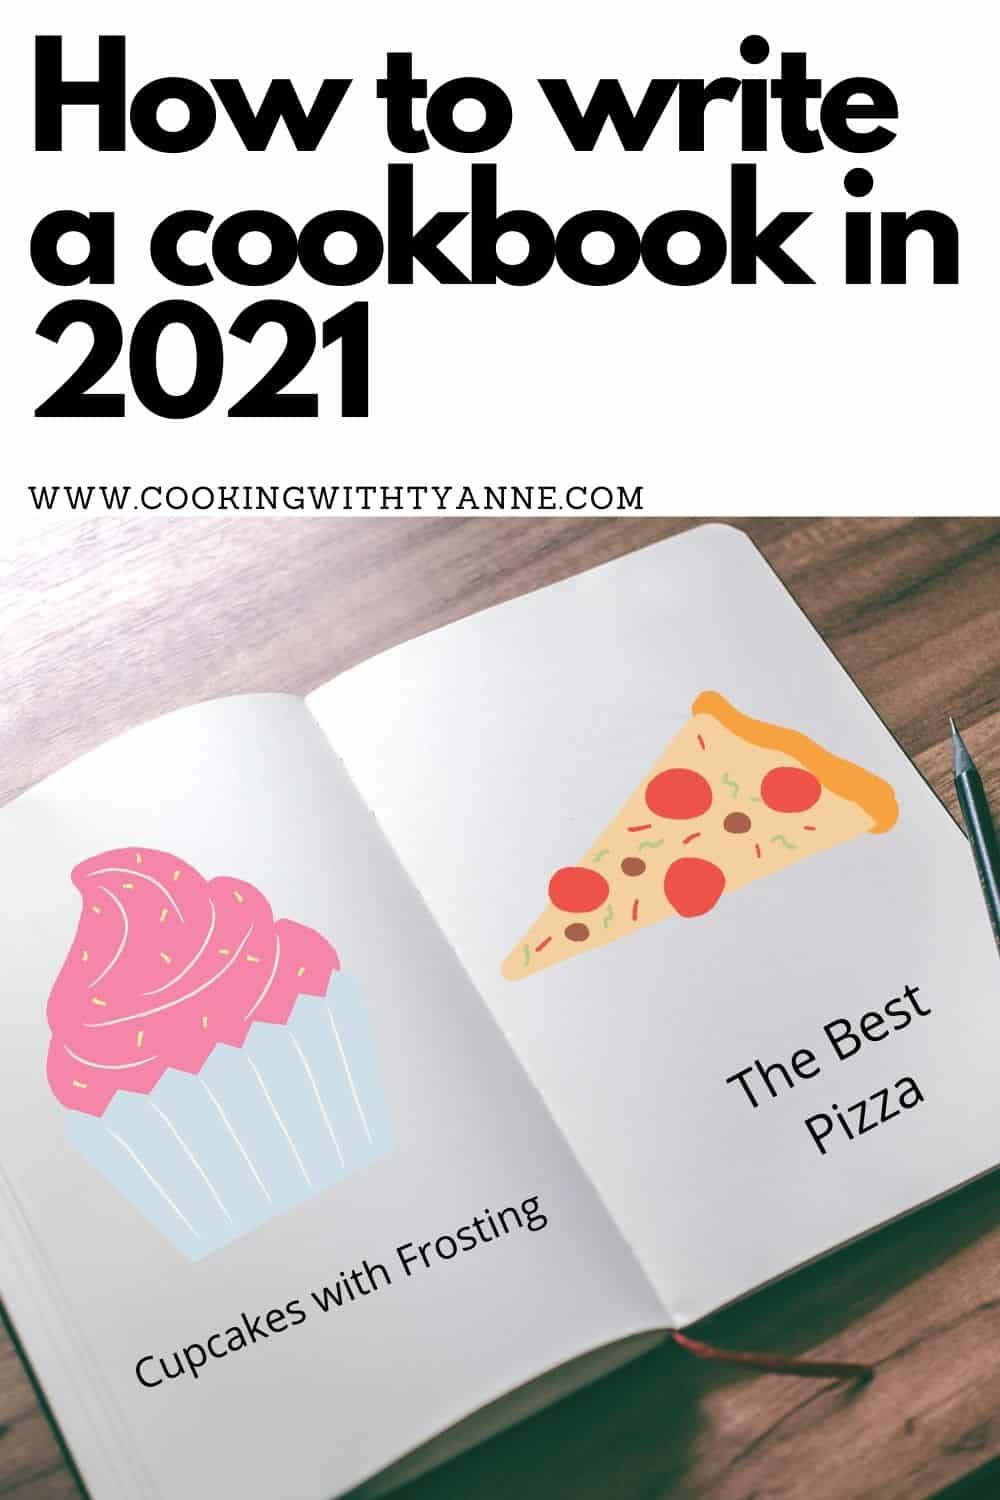 How to Publish a Cookbook in - Cooking with Tyanne